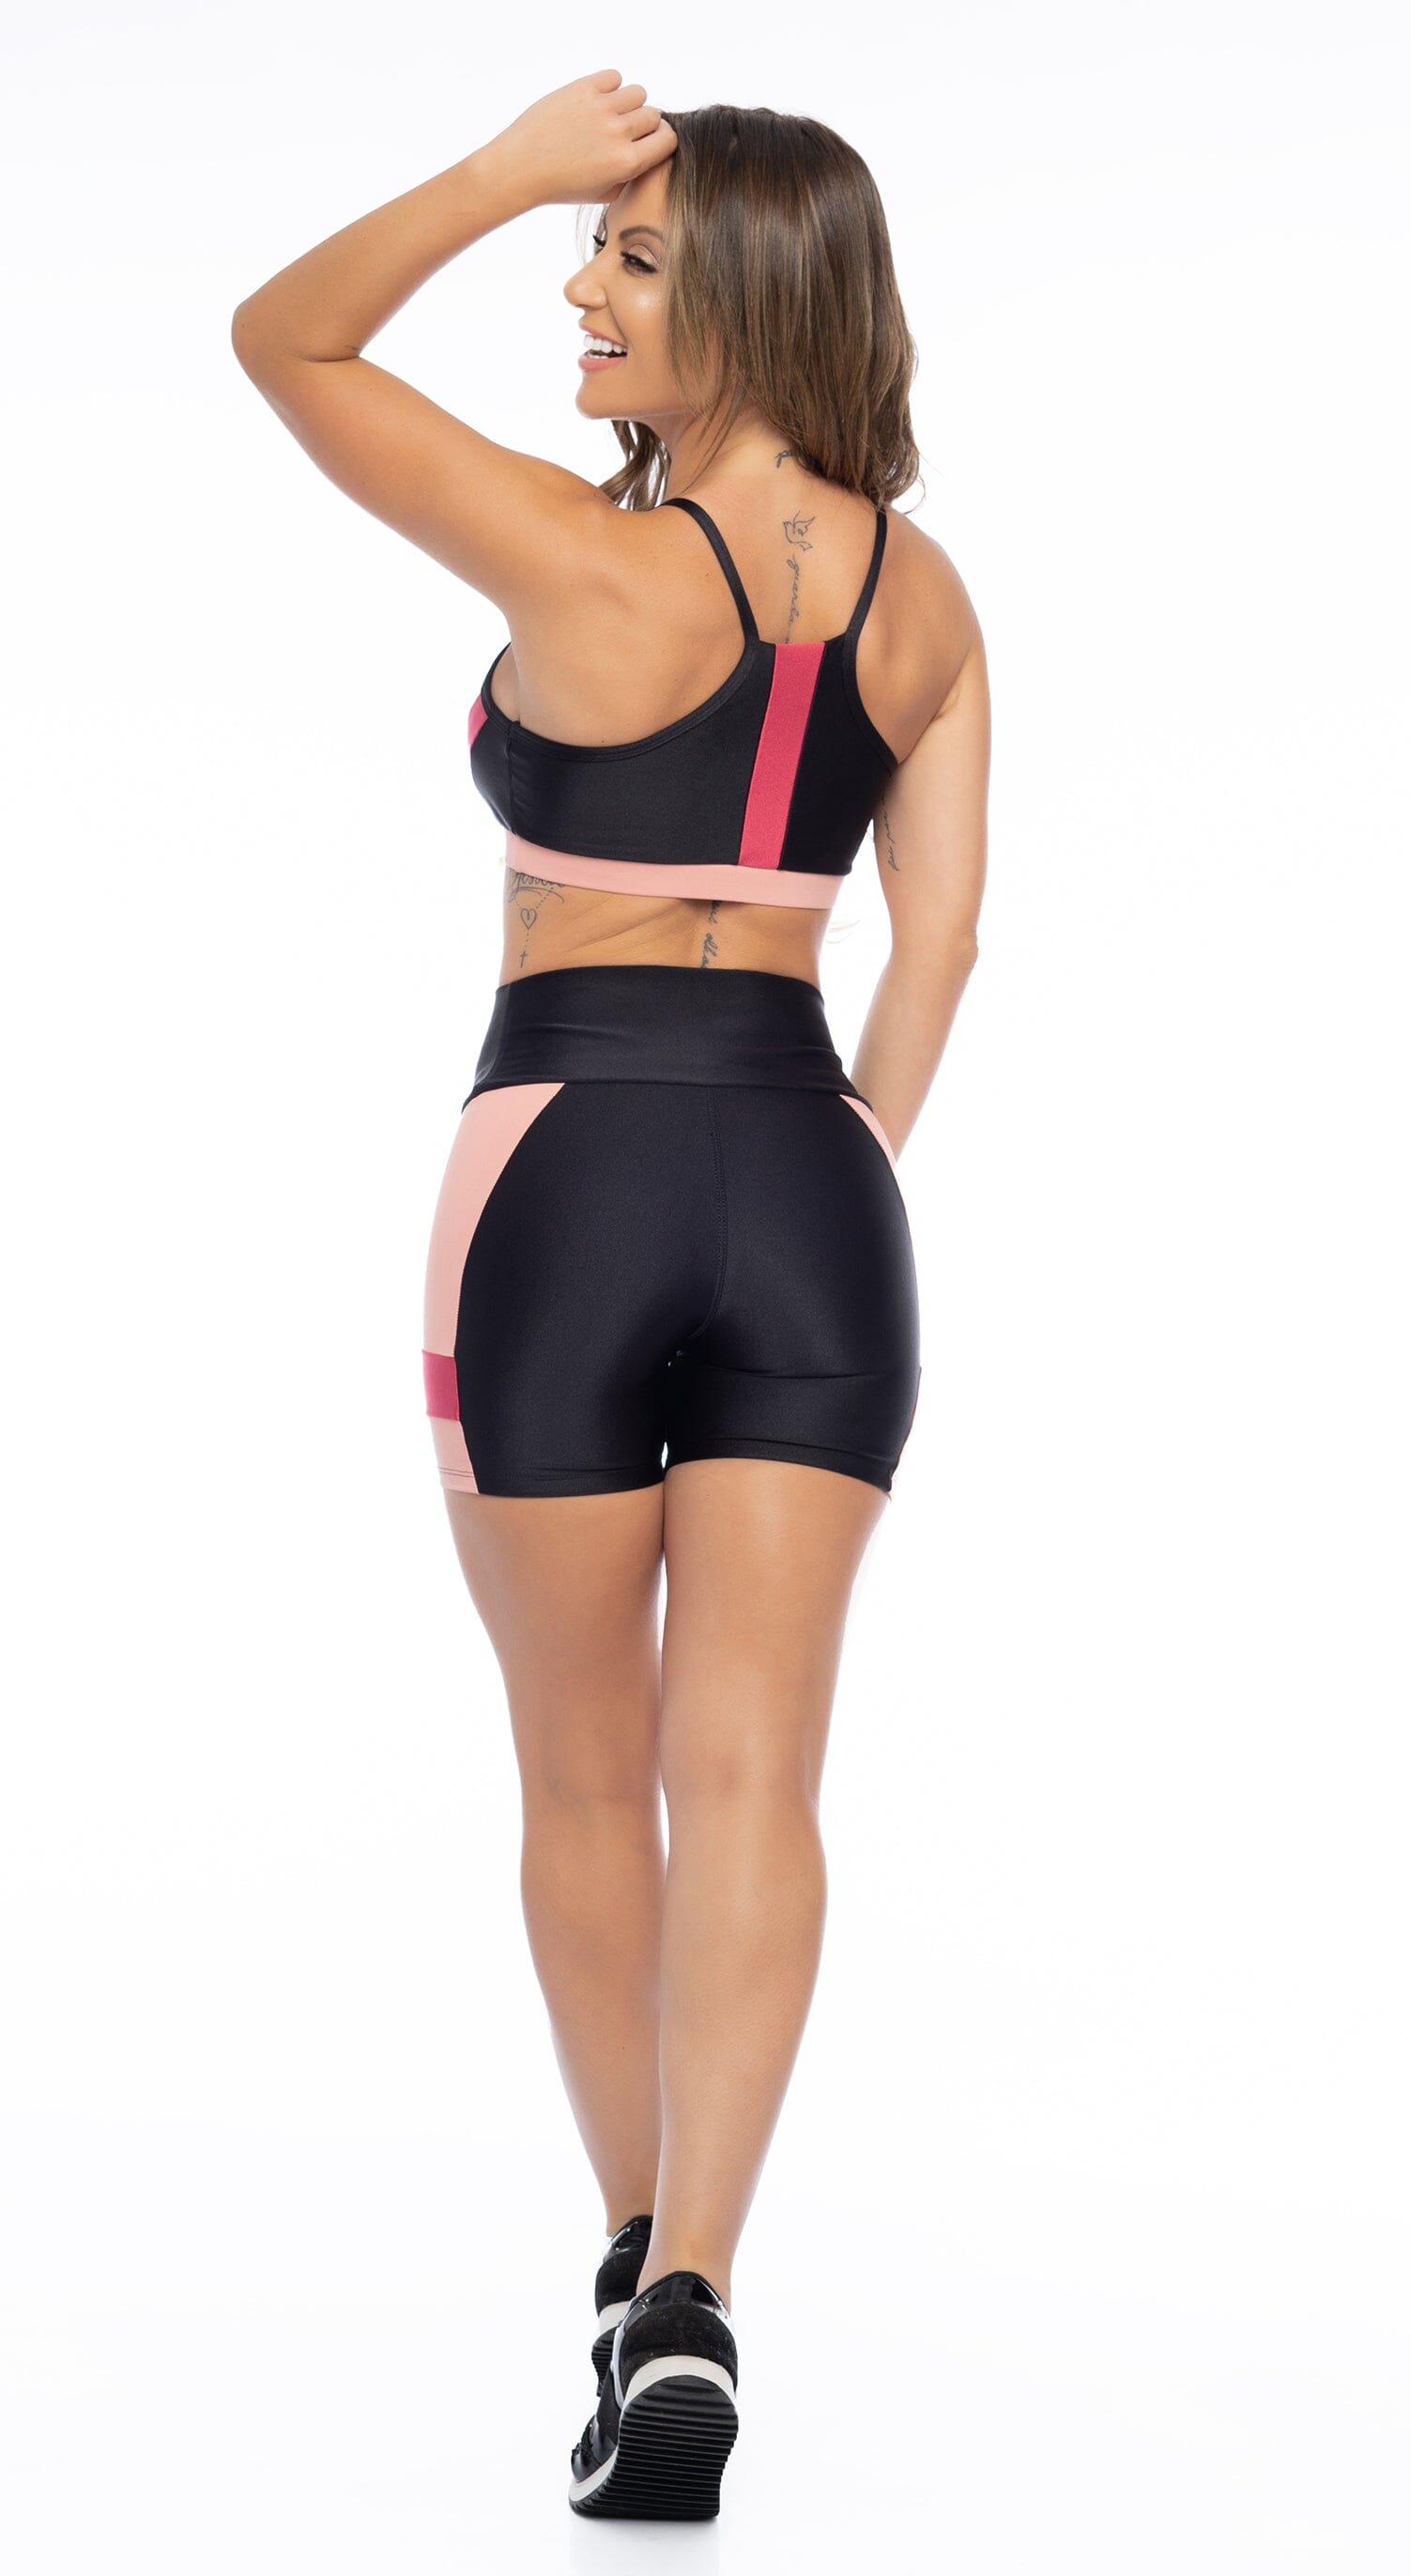 Exceptional Shorts - Black & Pink